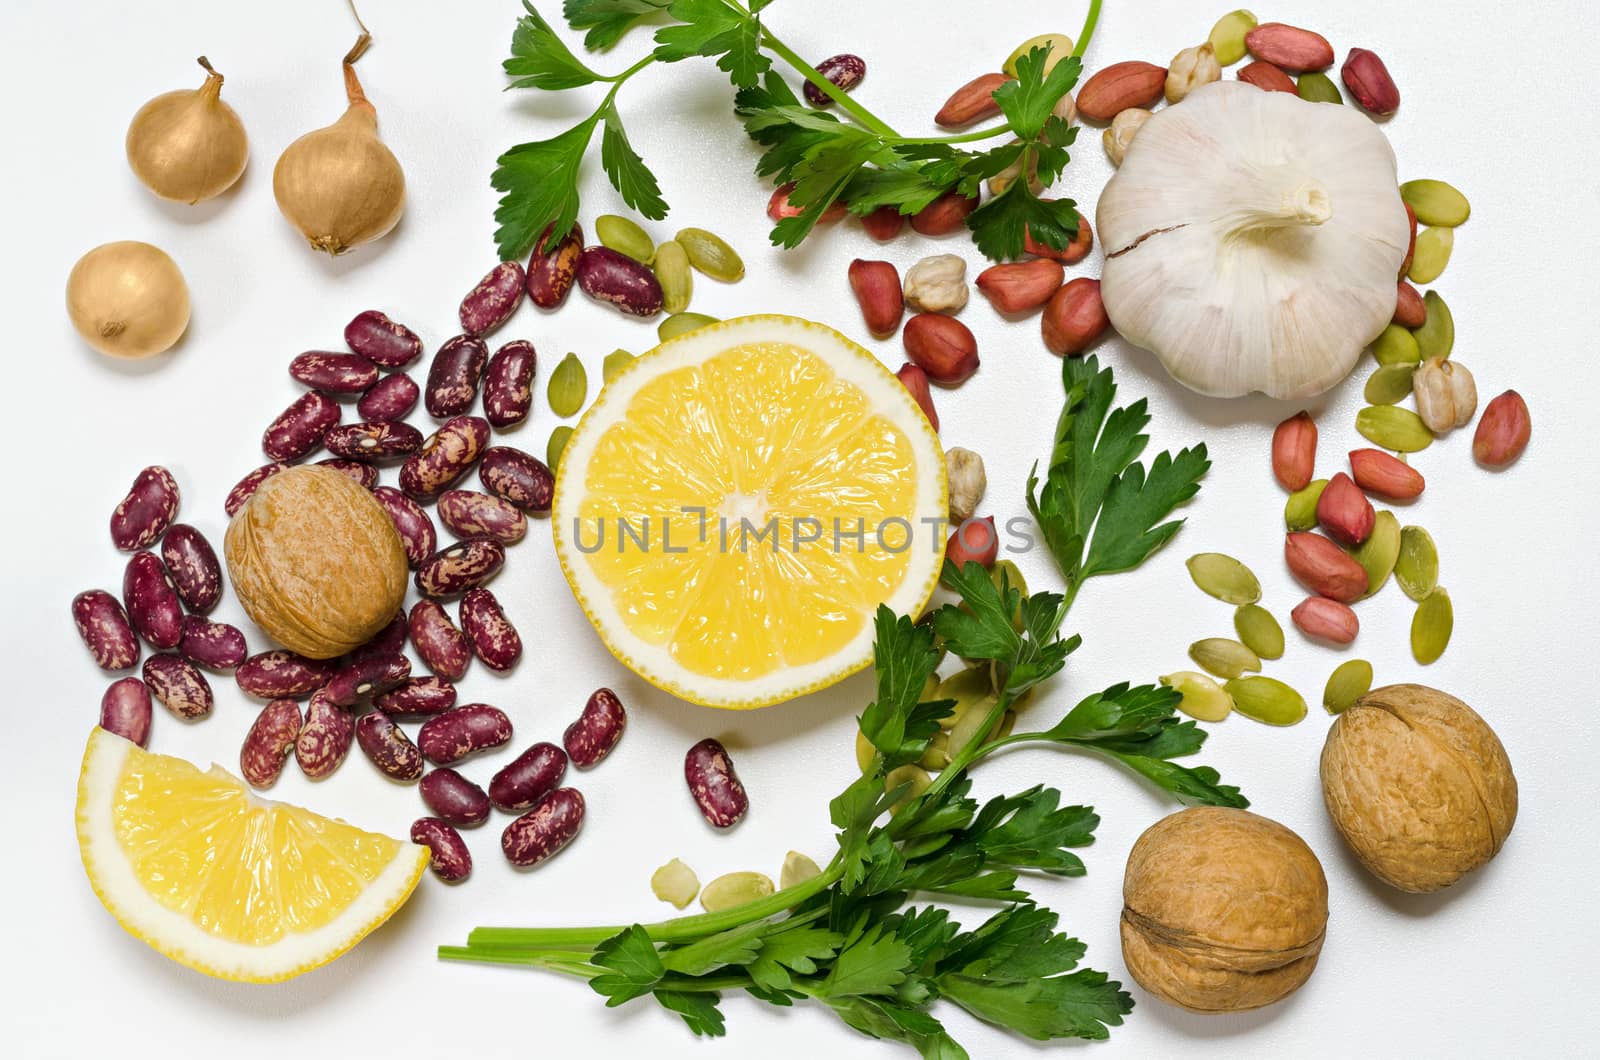 Lemon slices, beans,nuts and spices lie groups on a white background. Parsley, onion, garlic